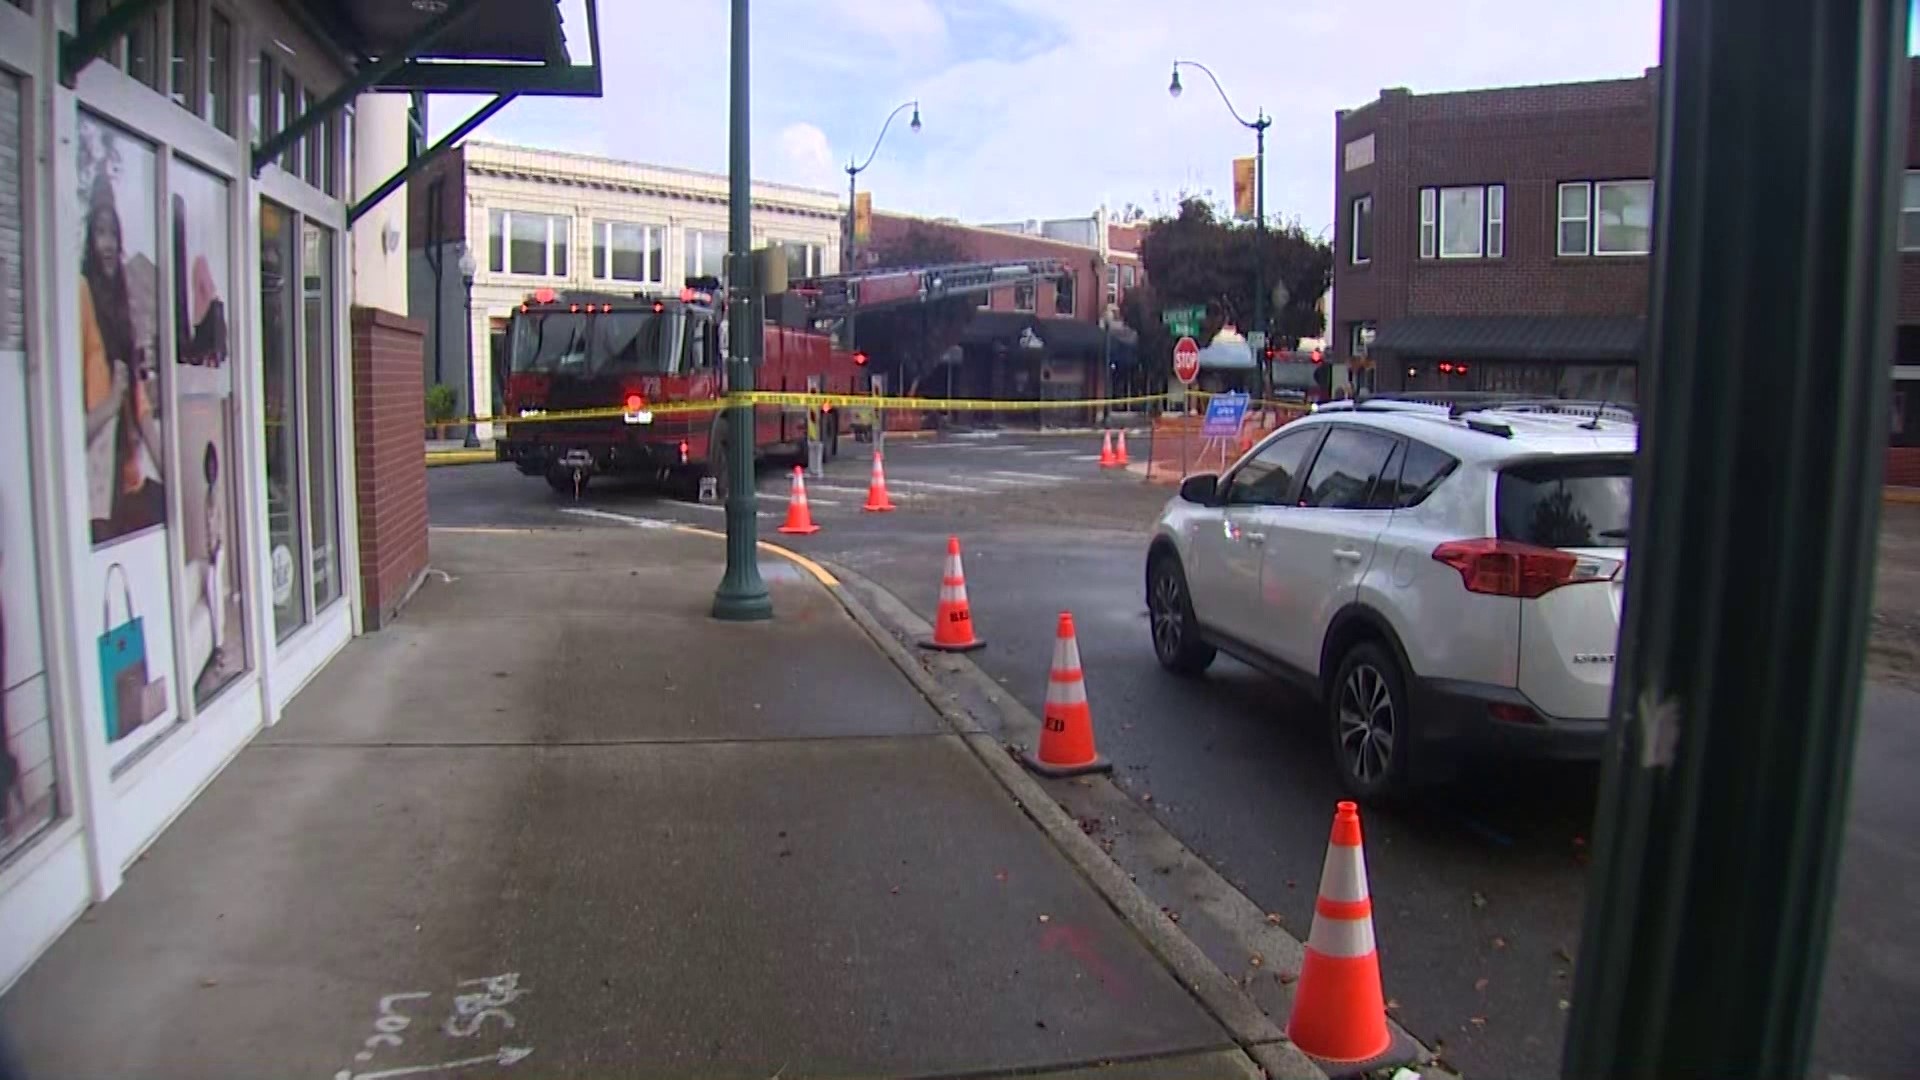 Main Street in downtown Sumner closed due to a 3-alarm fire early Friday morning. Officials said "multiple" businesses were damaged by the fire.